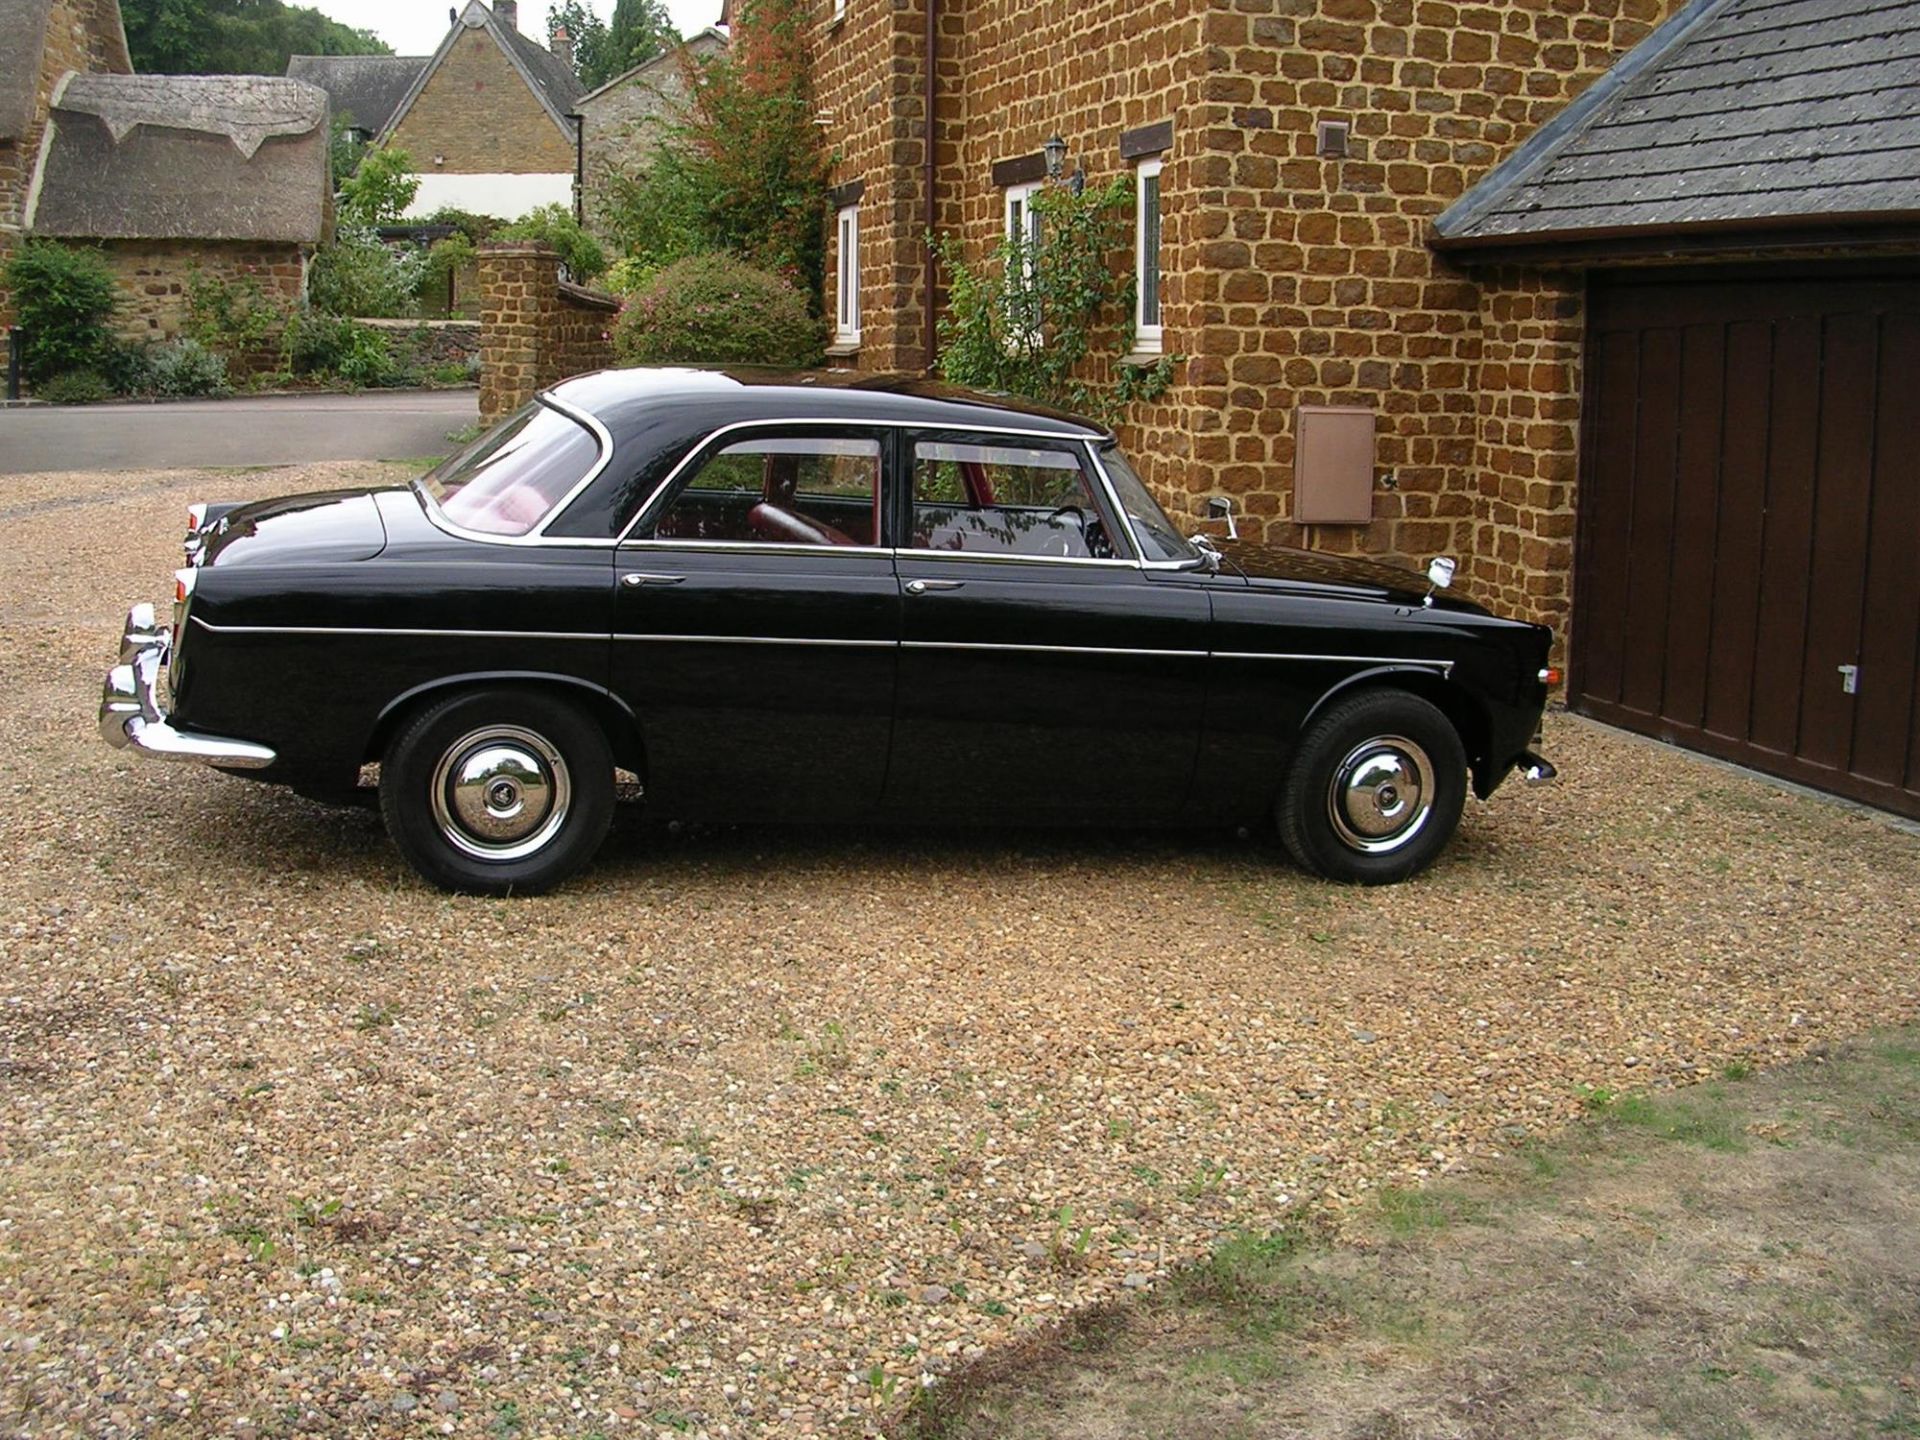 1959 Rover 3-Litre Saloon Mk1 (P5) - Image 4 of 10